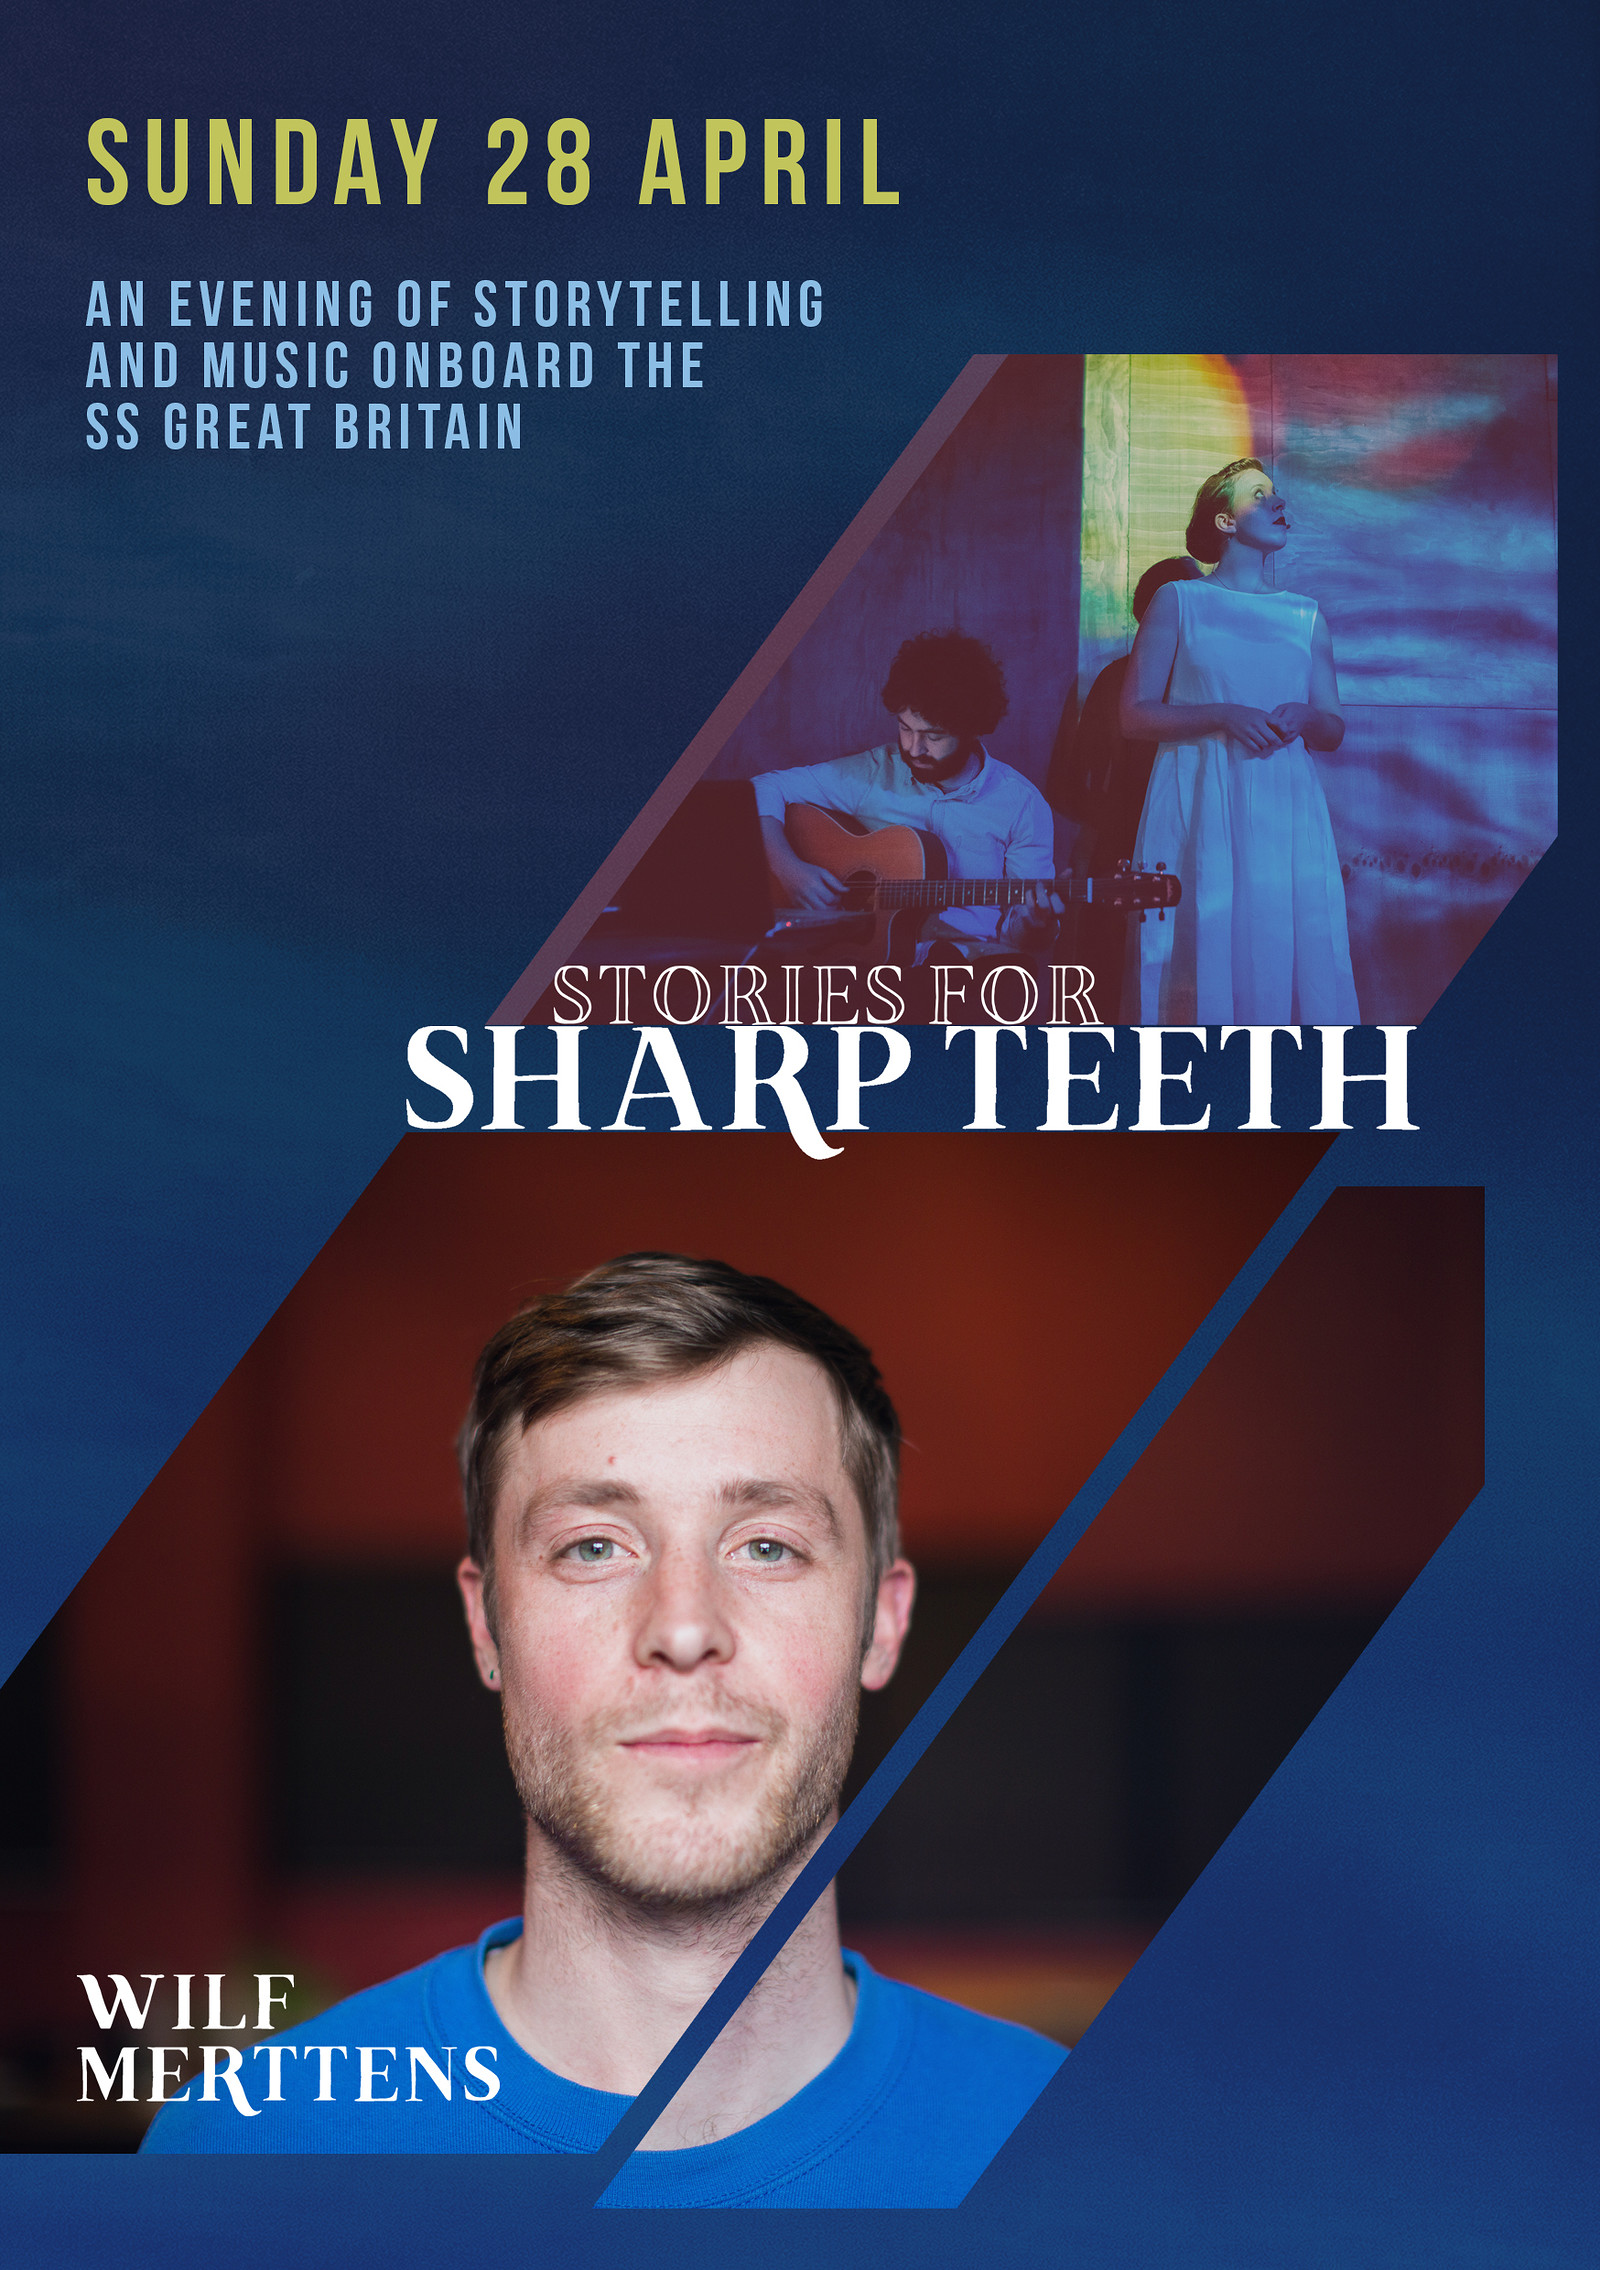 Stories for Sharp Teeth Present Wilf Merttens at SS Great Britain